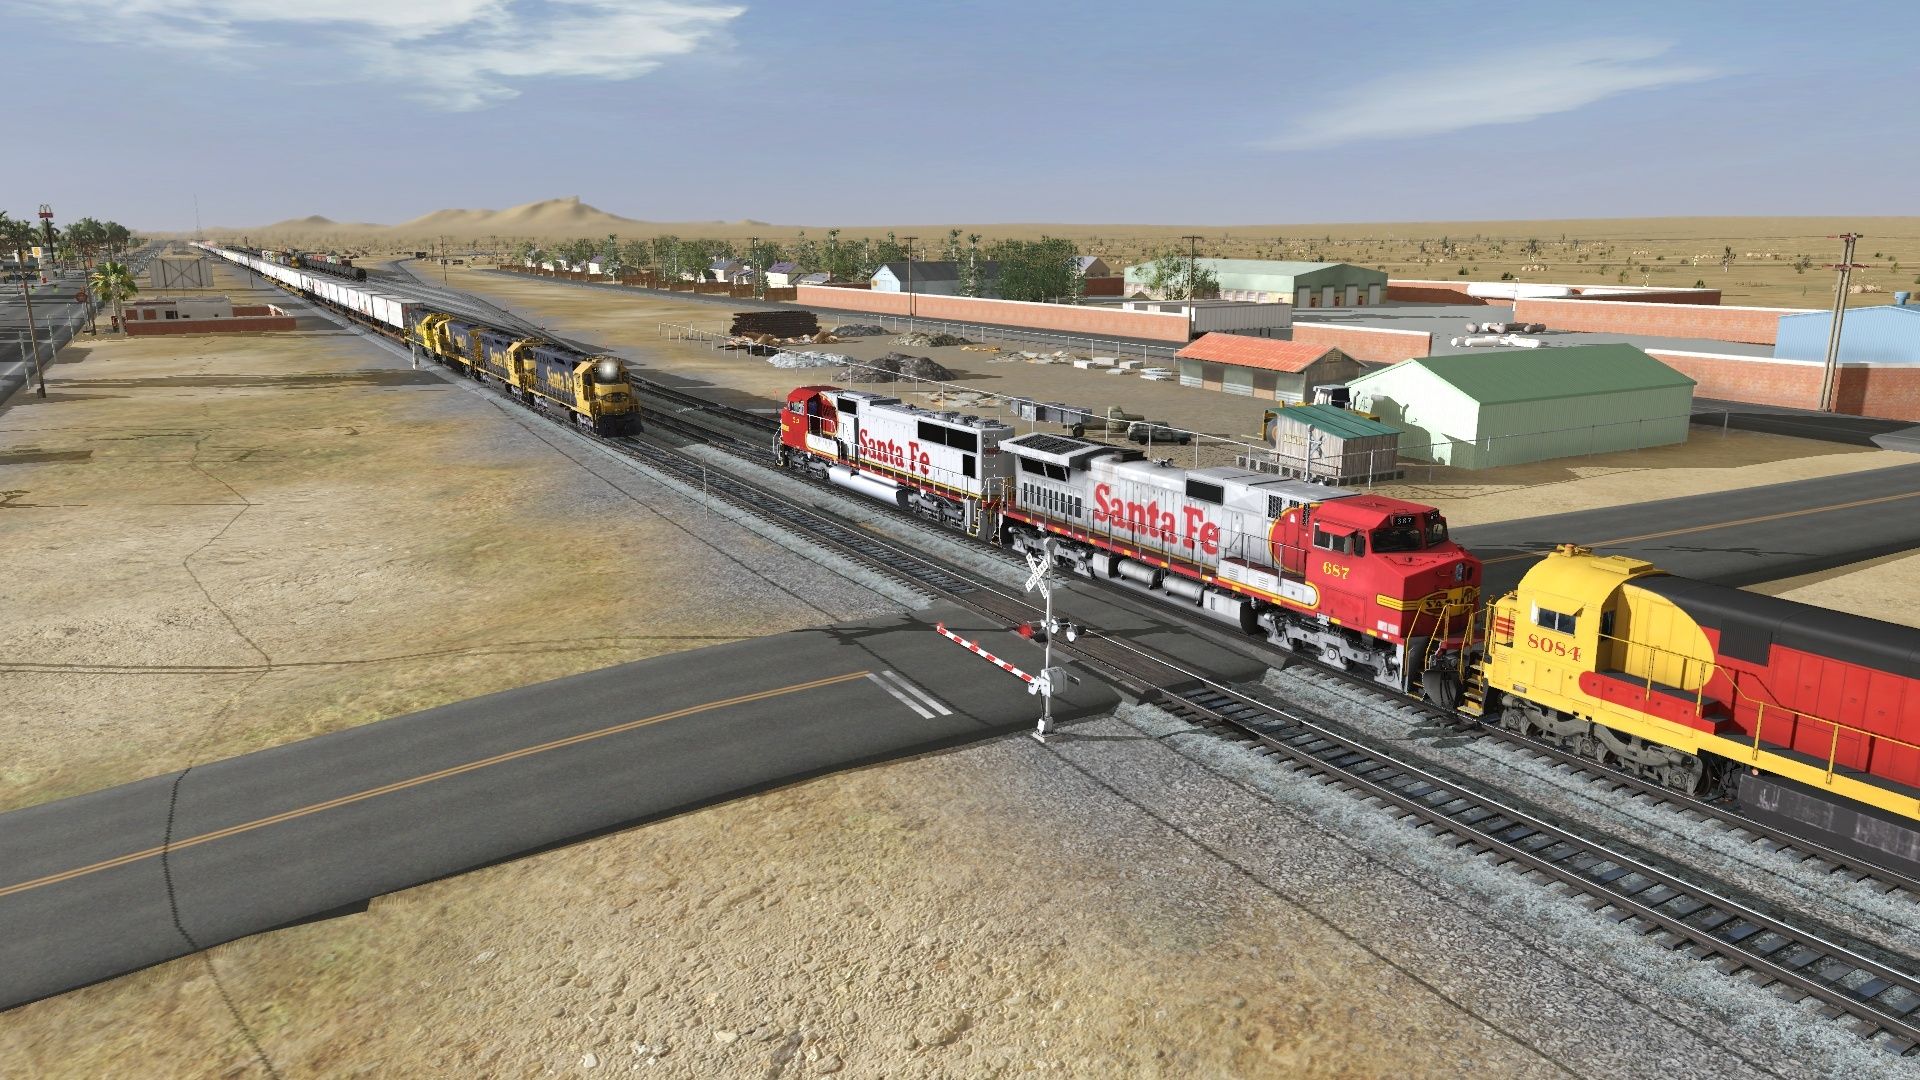 Santa-Fe-trains-pass-by-each-other-in-Mojave%2C-CA.jpg